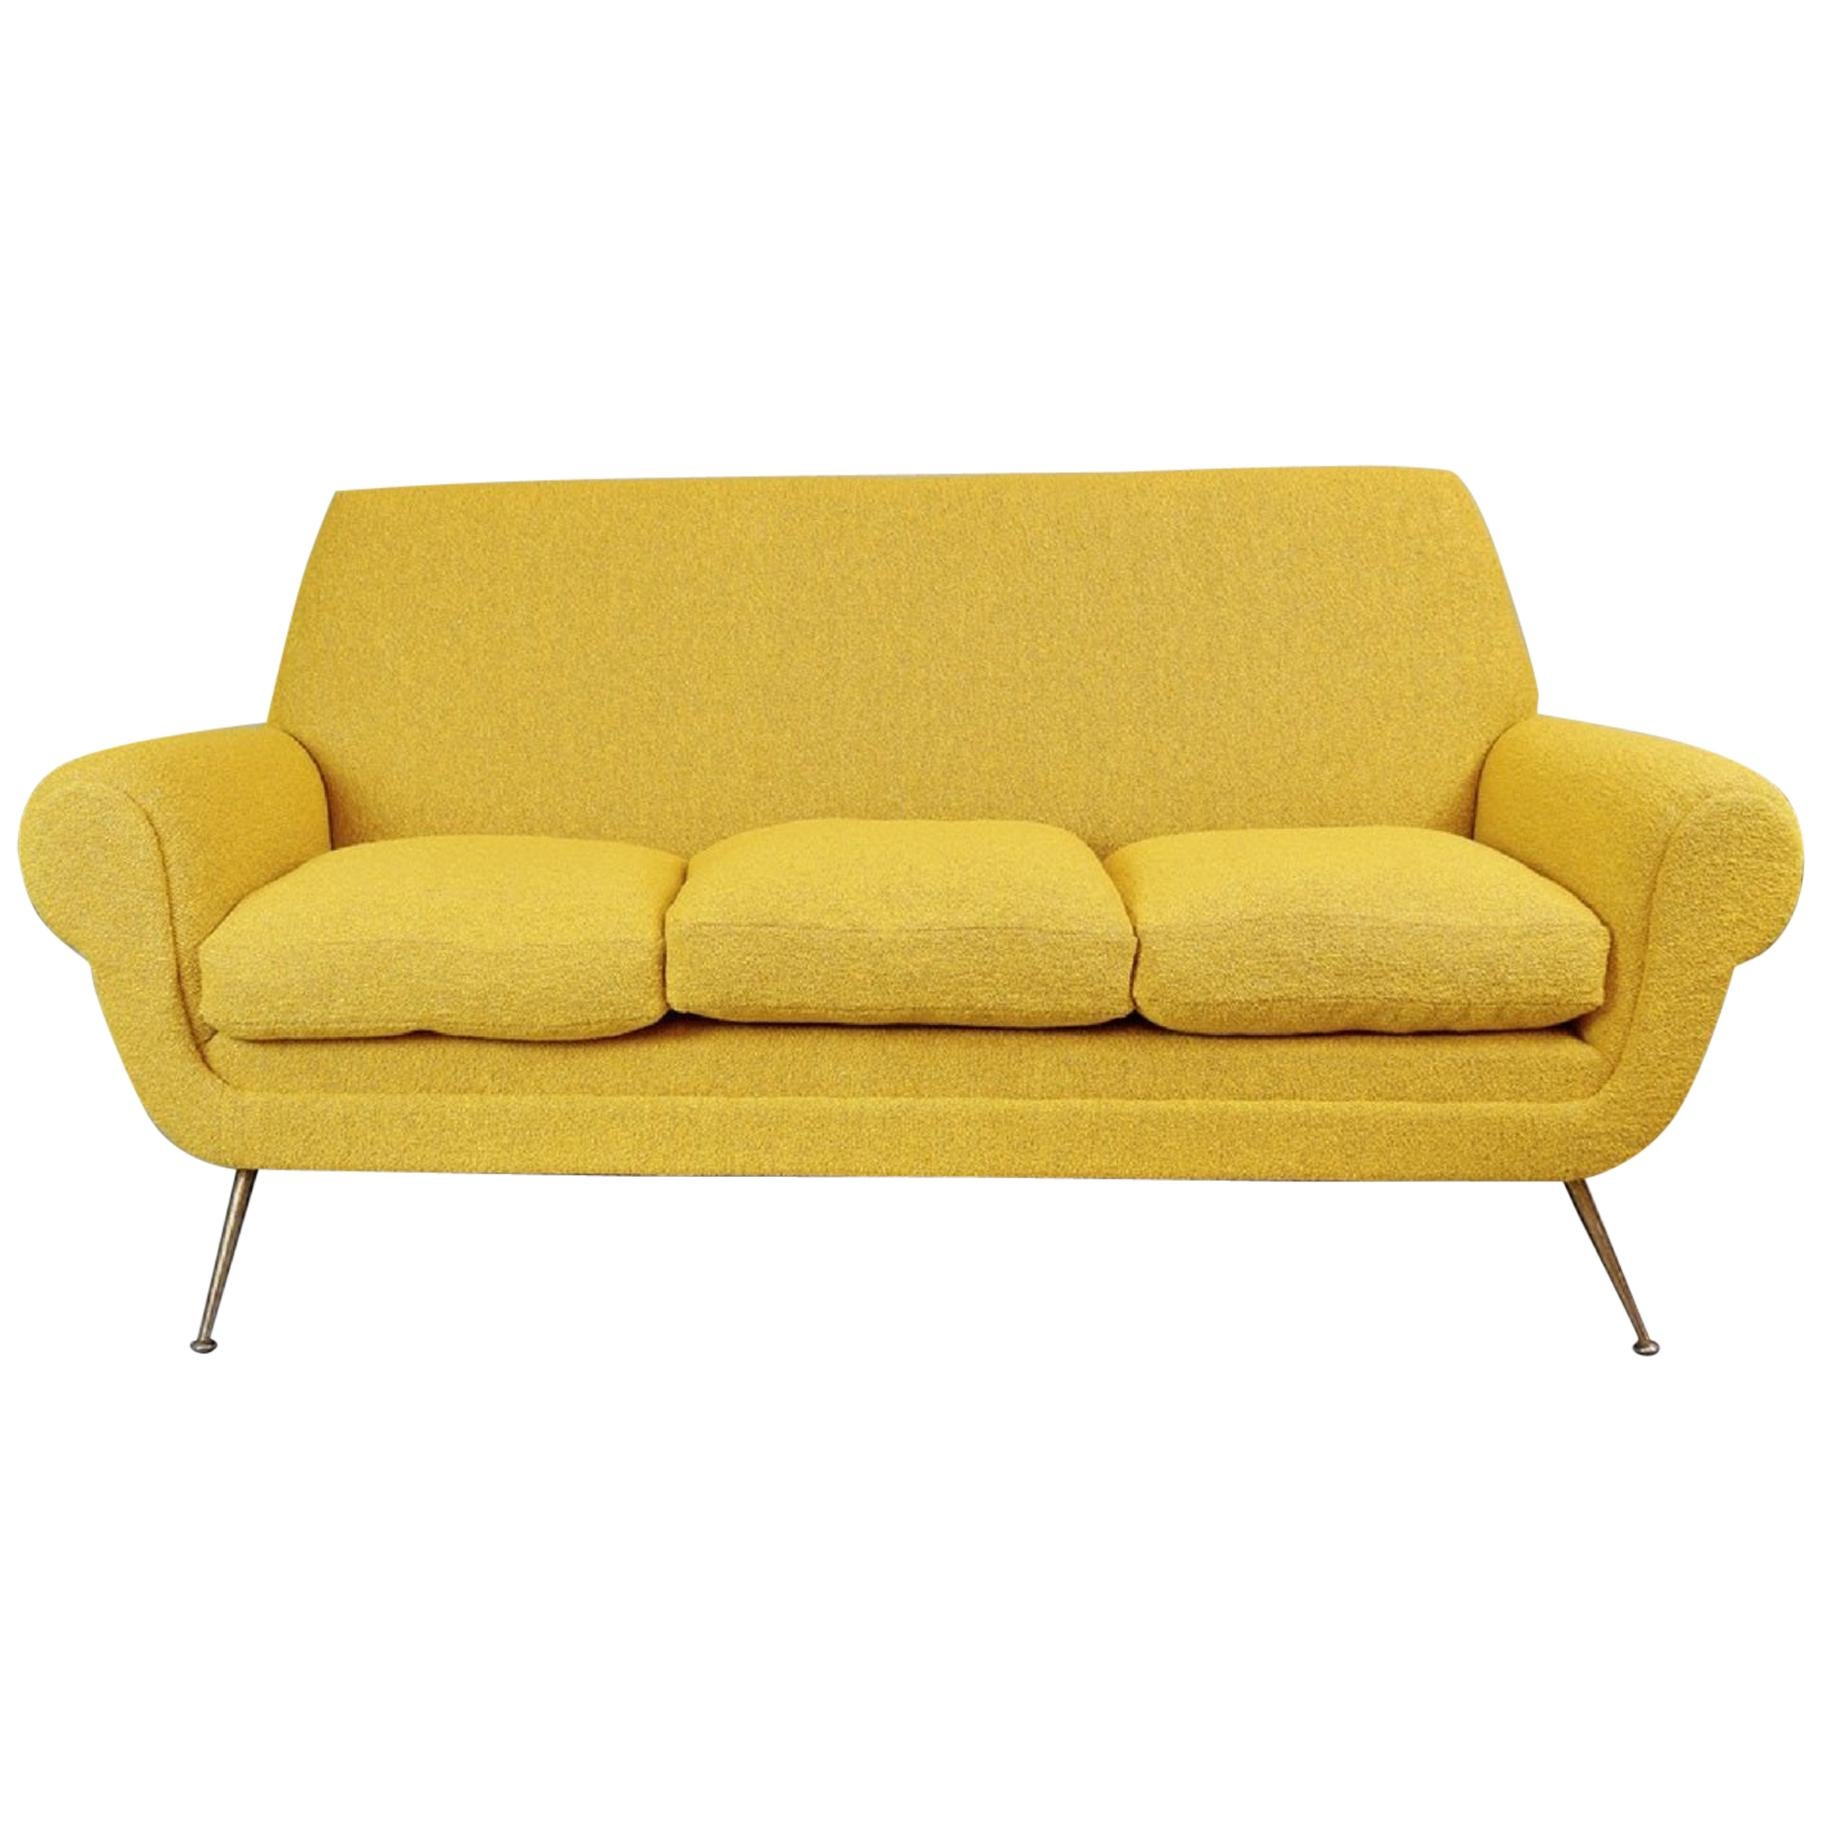 Gigi Radice for Minotti 3-Seat Sofa, 1950s, Curry Color New Upholstery For Sale